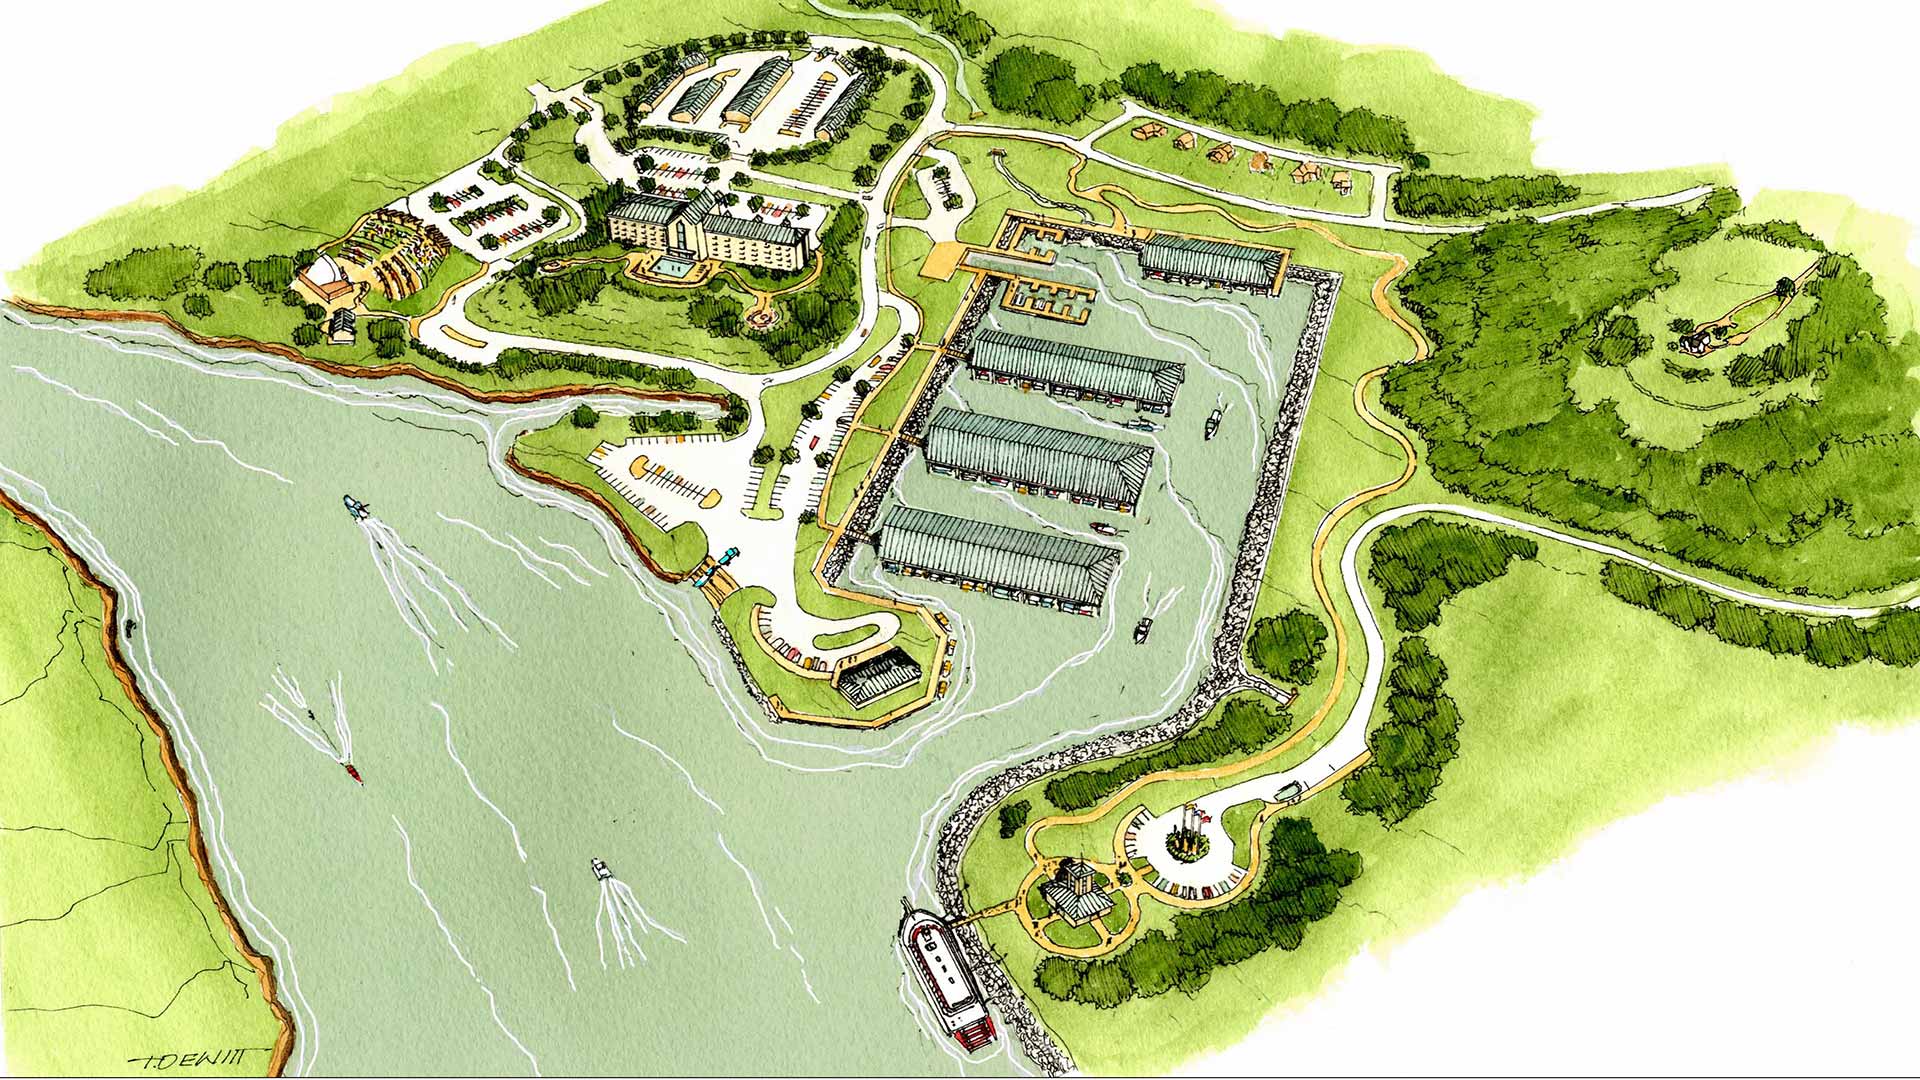 An illustration rendering of a feasibility study for a marina in Savannah.